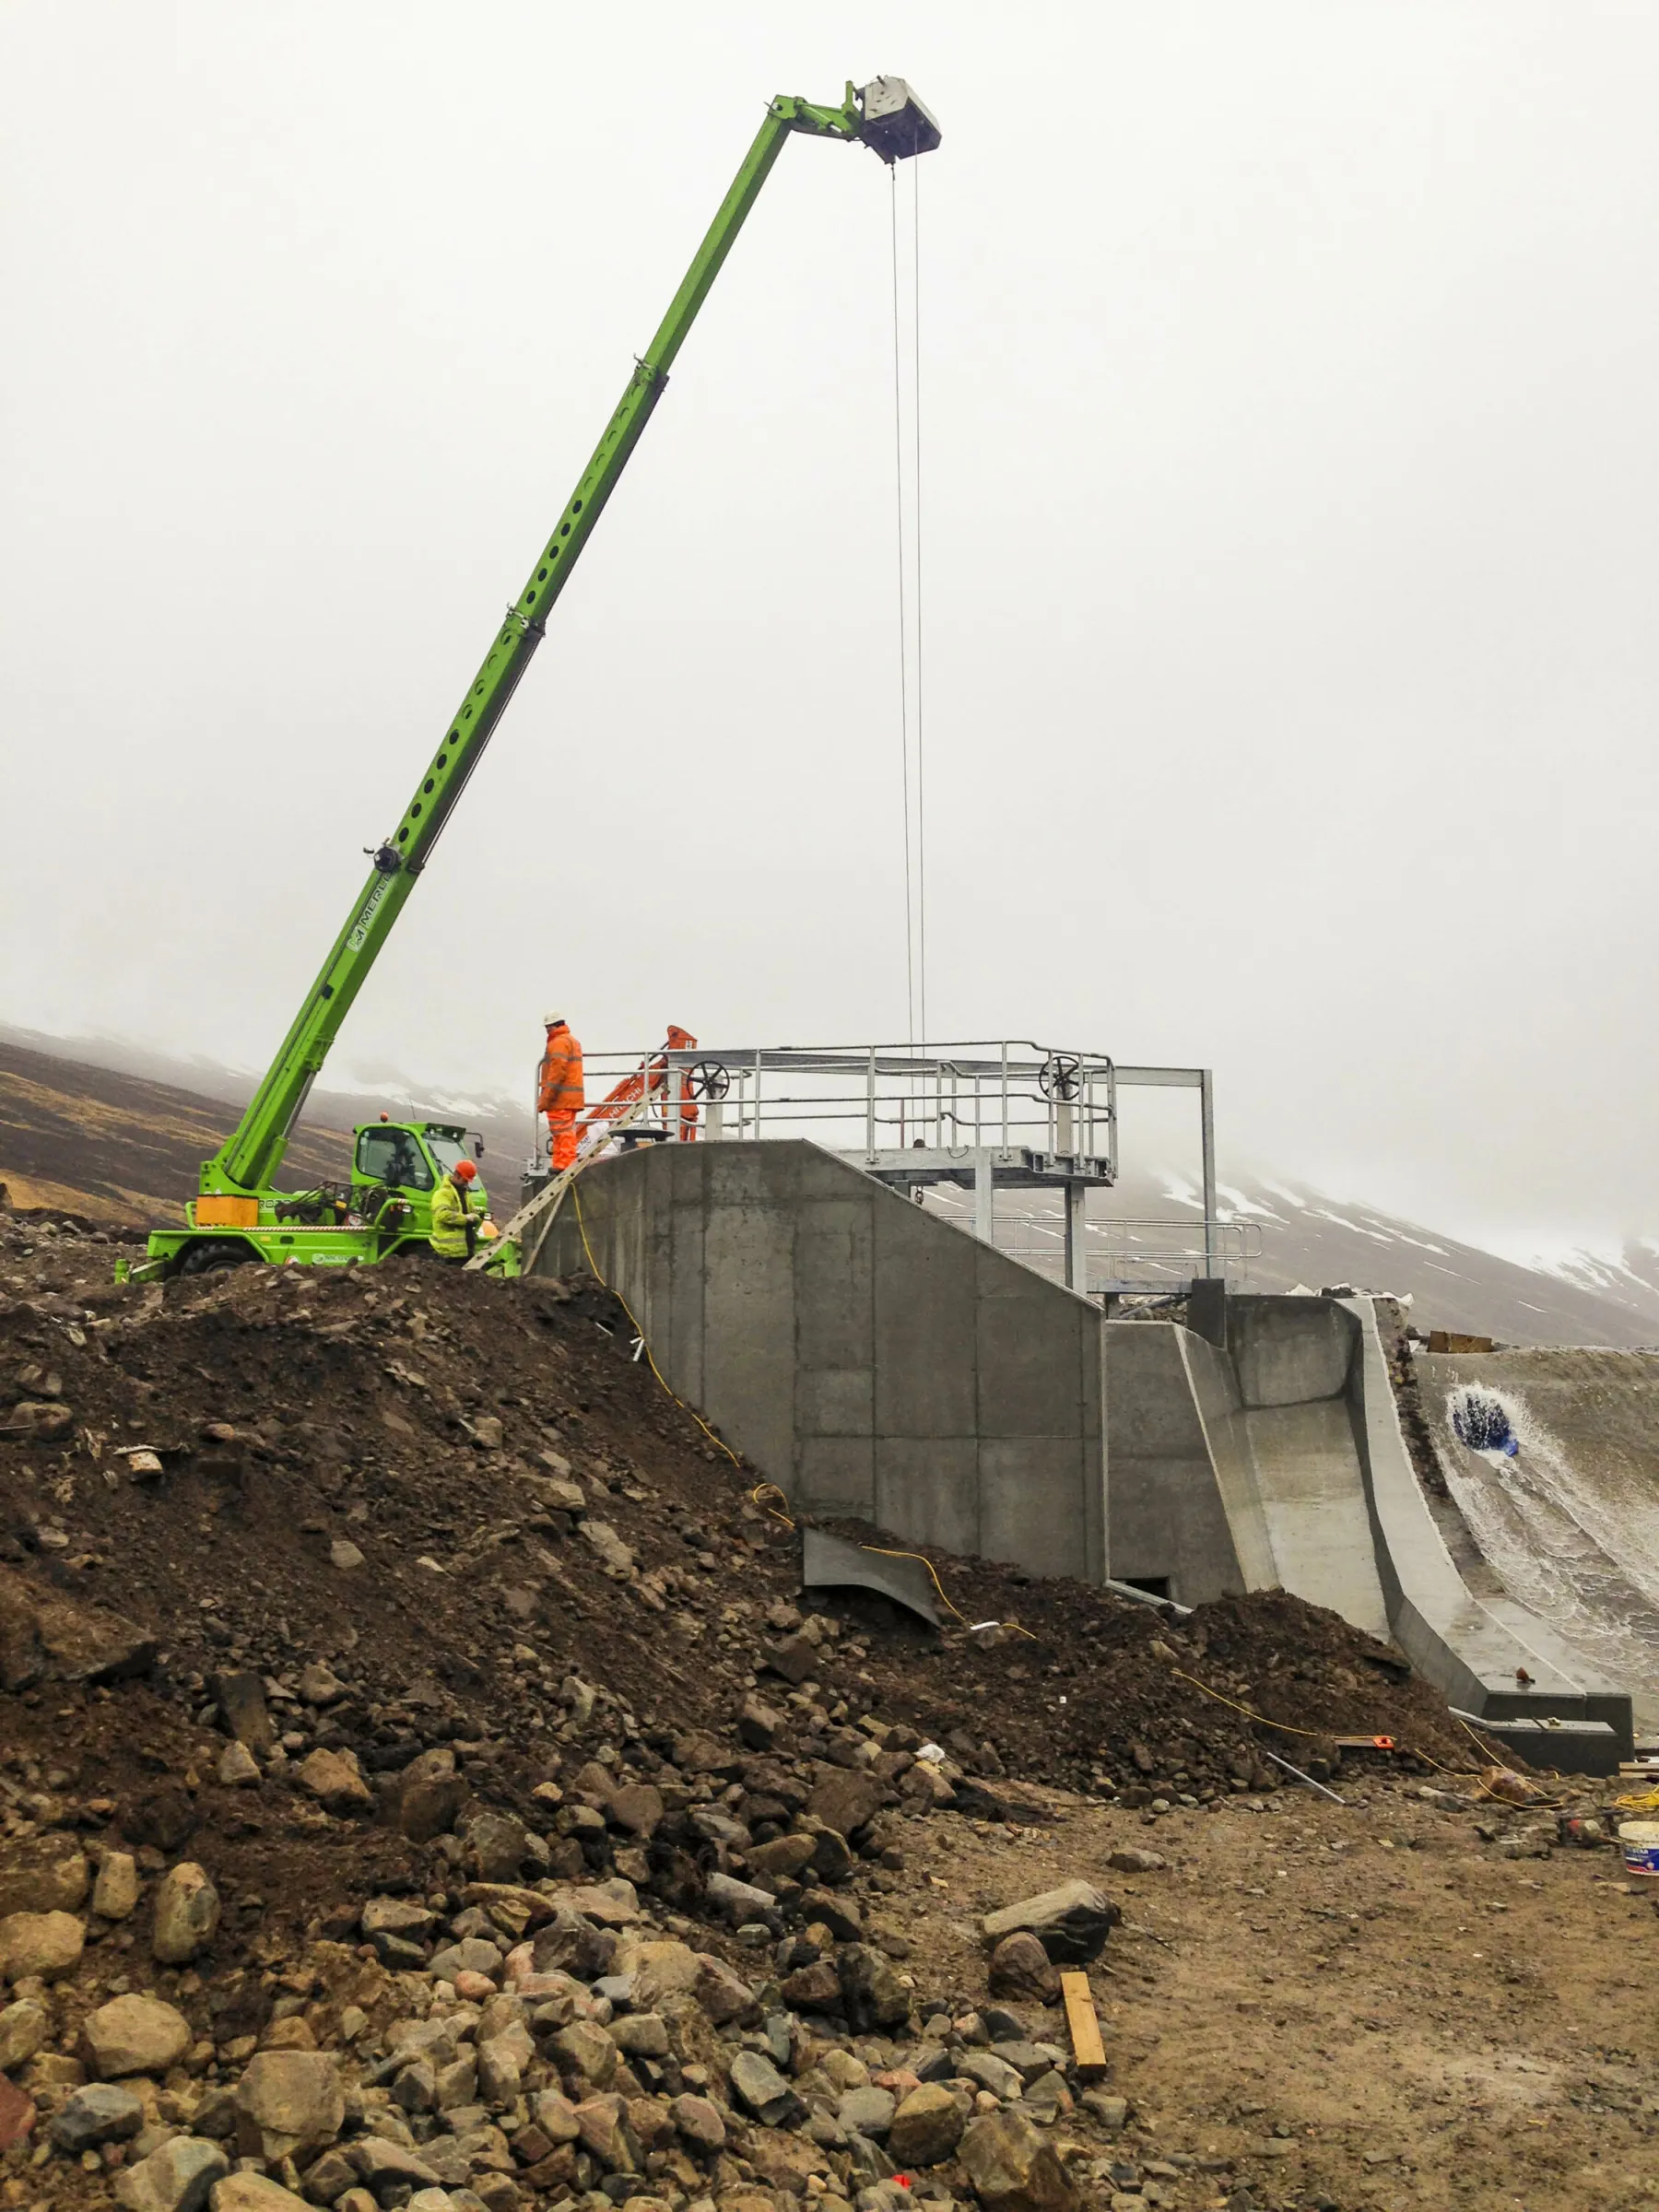 Construction consultants visiting the site of a hydro project in Scotland. A crane is positioned behind the site of a new hydro structure made in concrete.